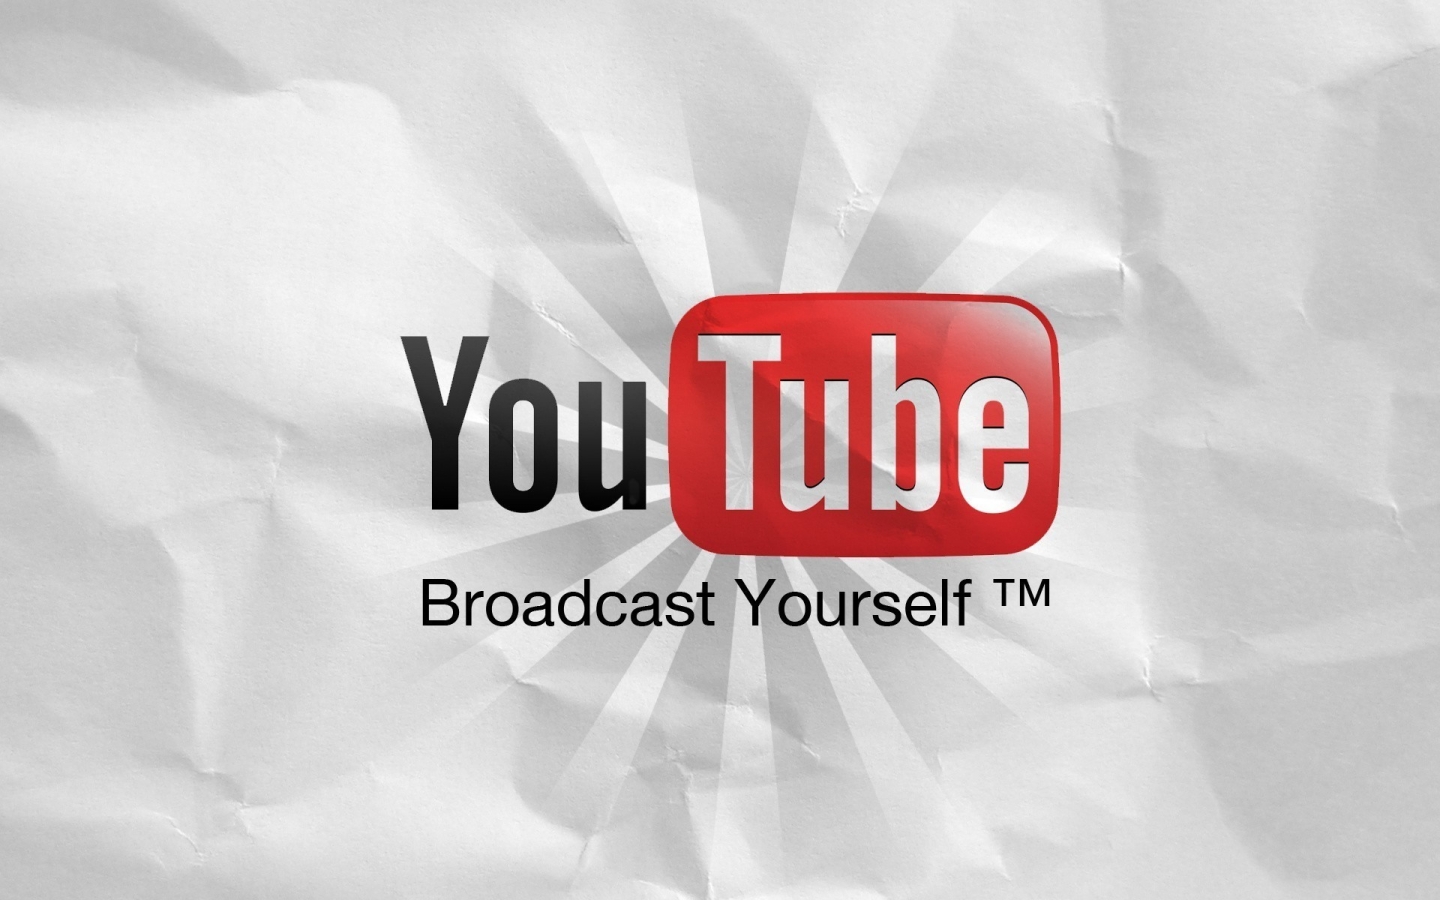 YouTube for 1440 x 900 widescreen resolution